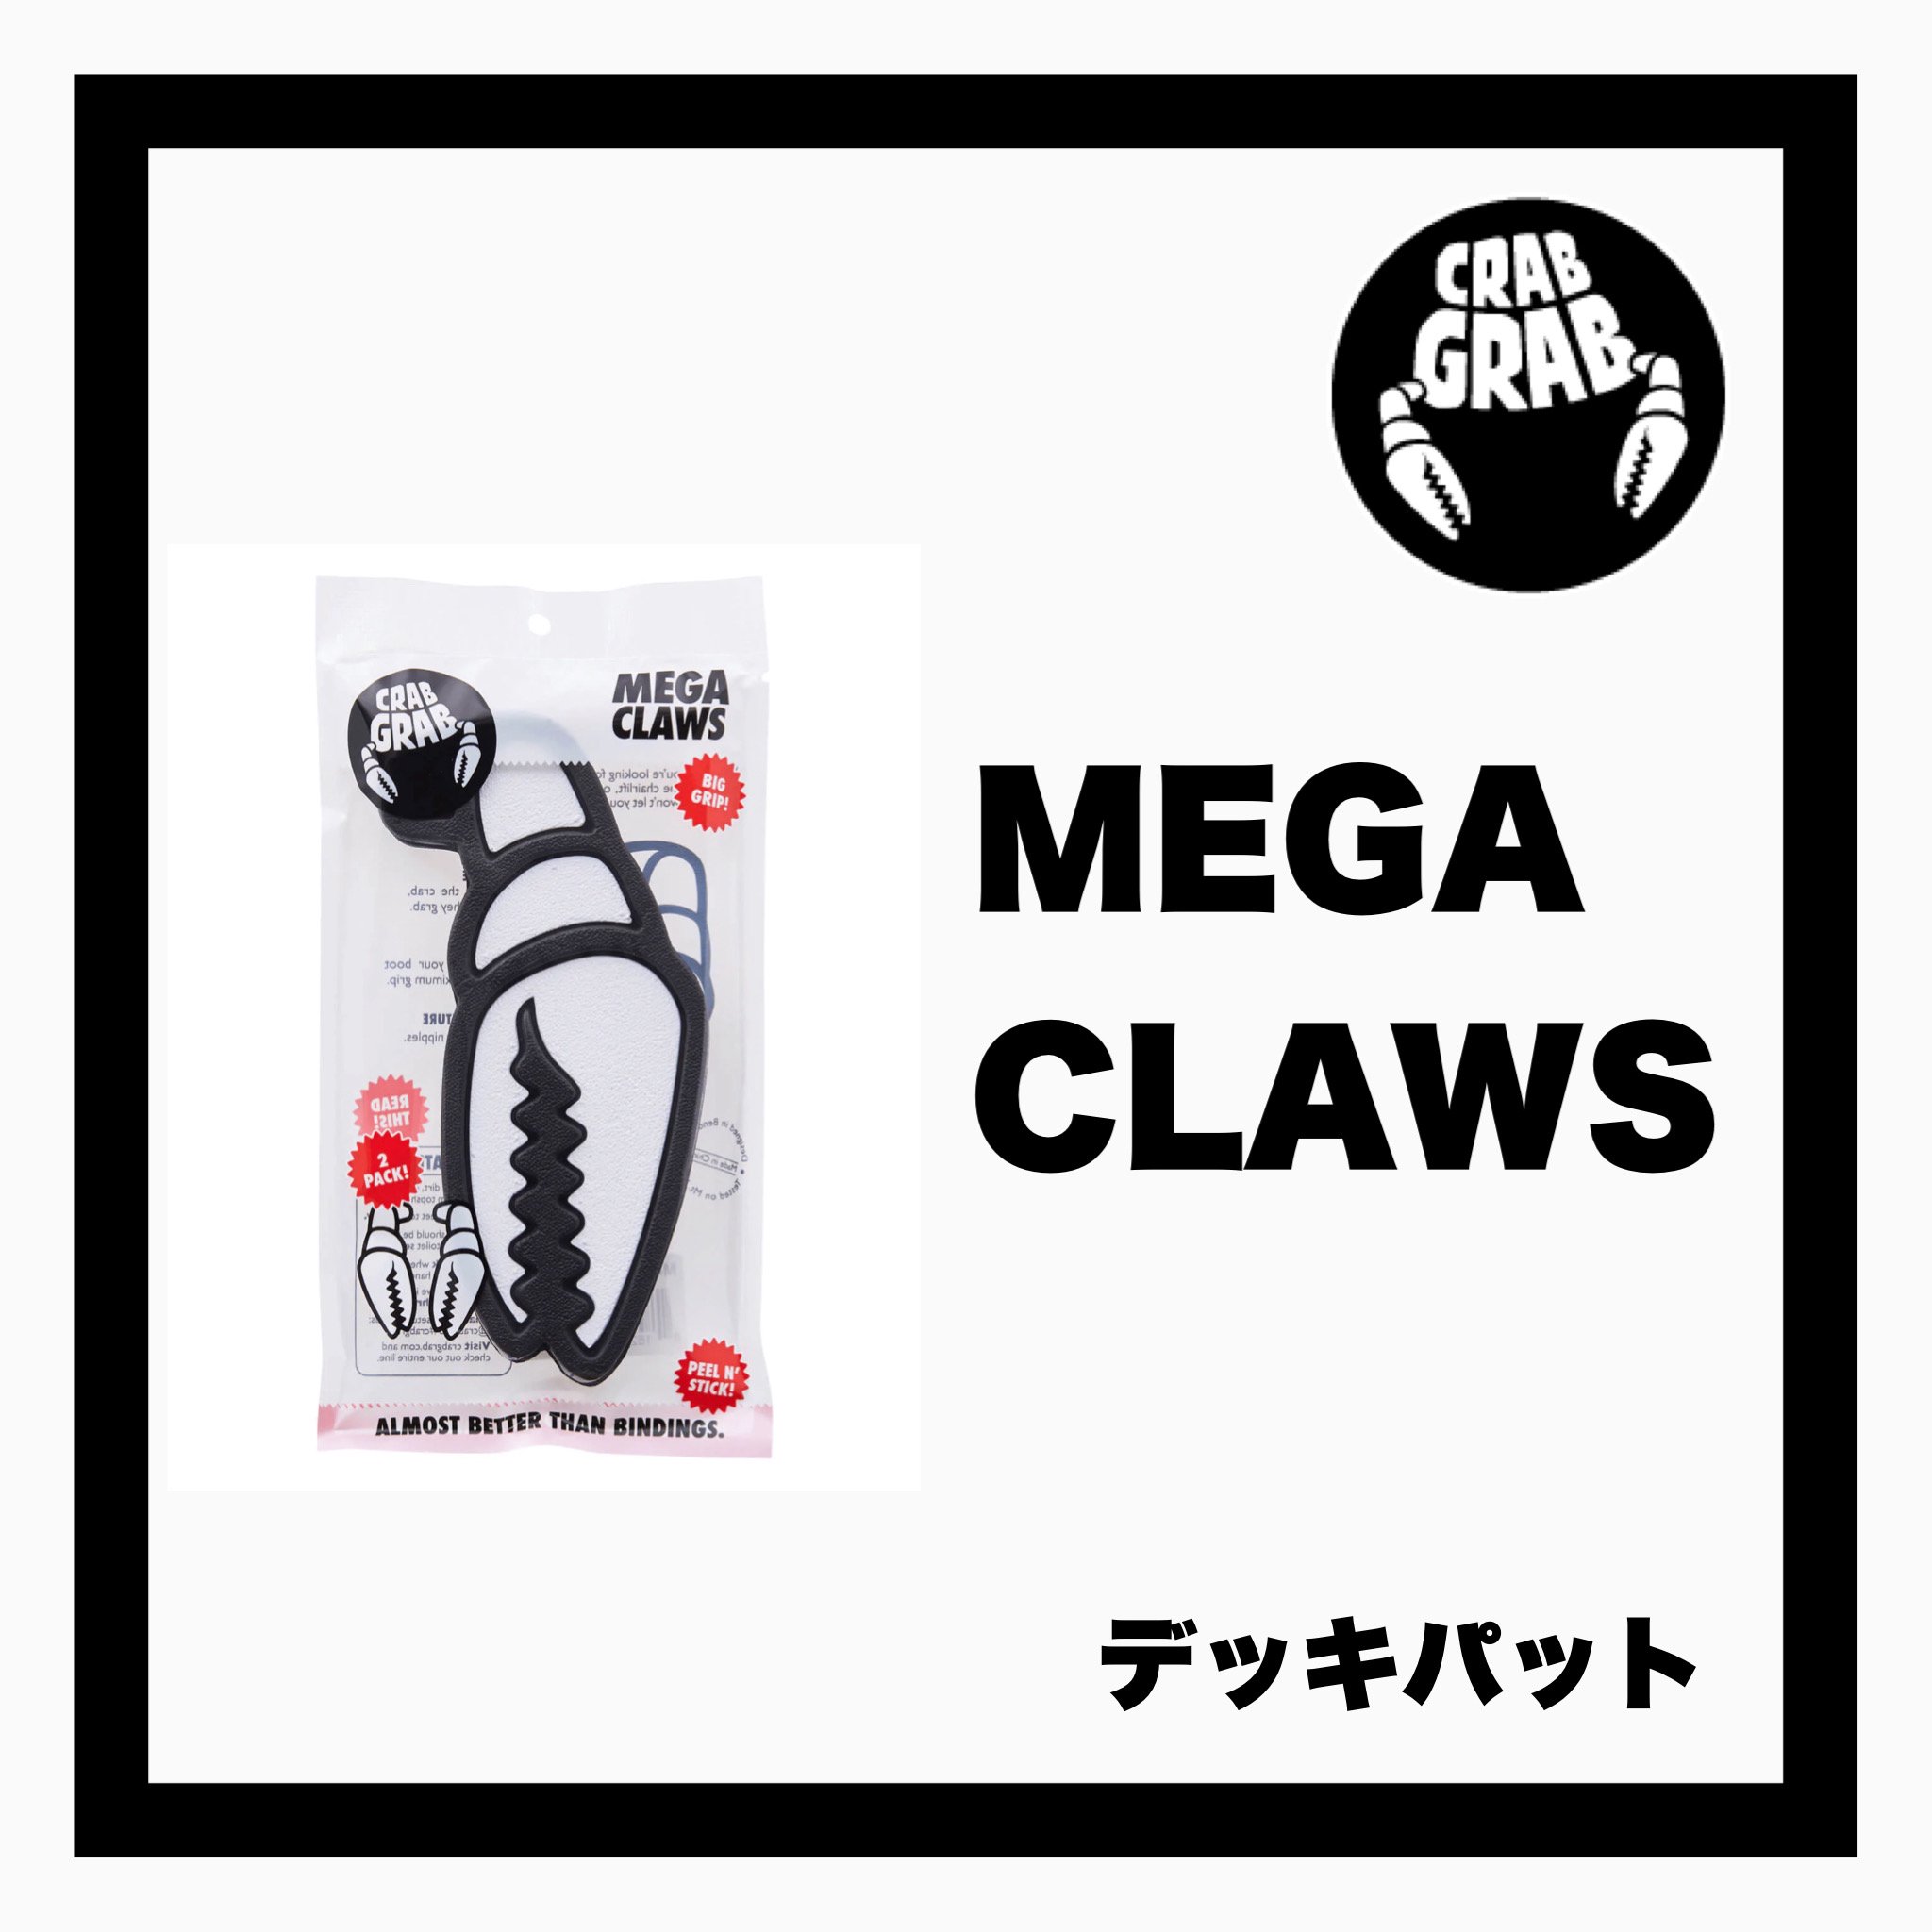 <img class='new_mark_img1' src='https://img.shop-pro.jp/img/new/icons14.gif' style='border:none;display:inline;margin:0px;padding:0px;width:auto;' />CRAB GRABMEGA CLAWS